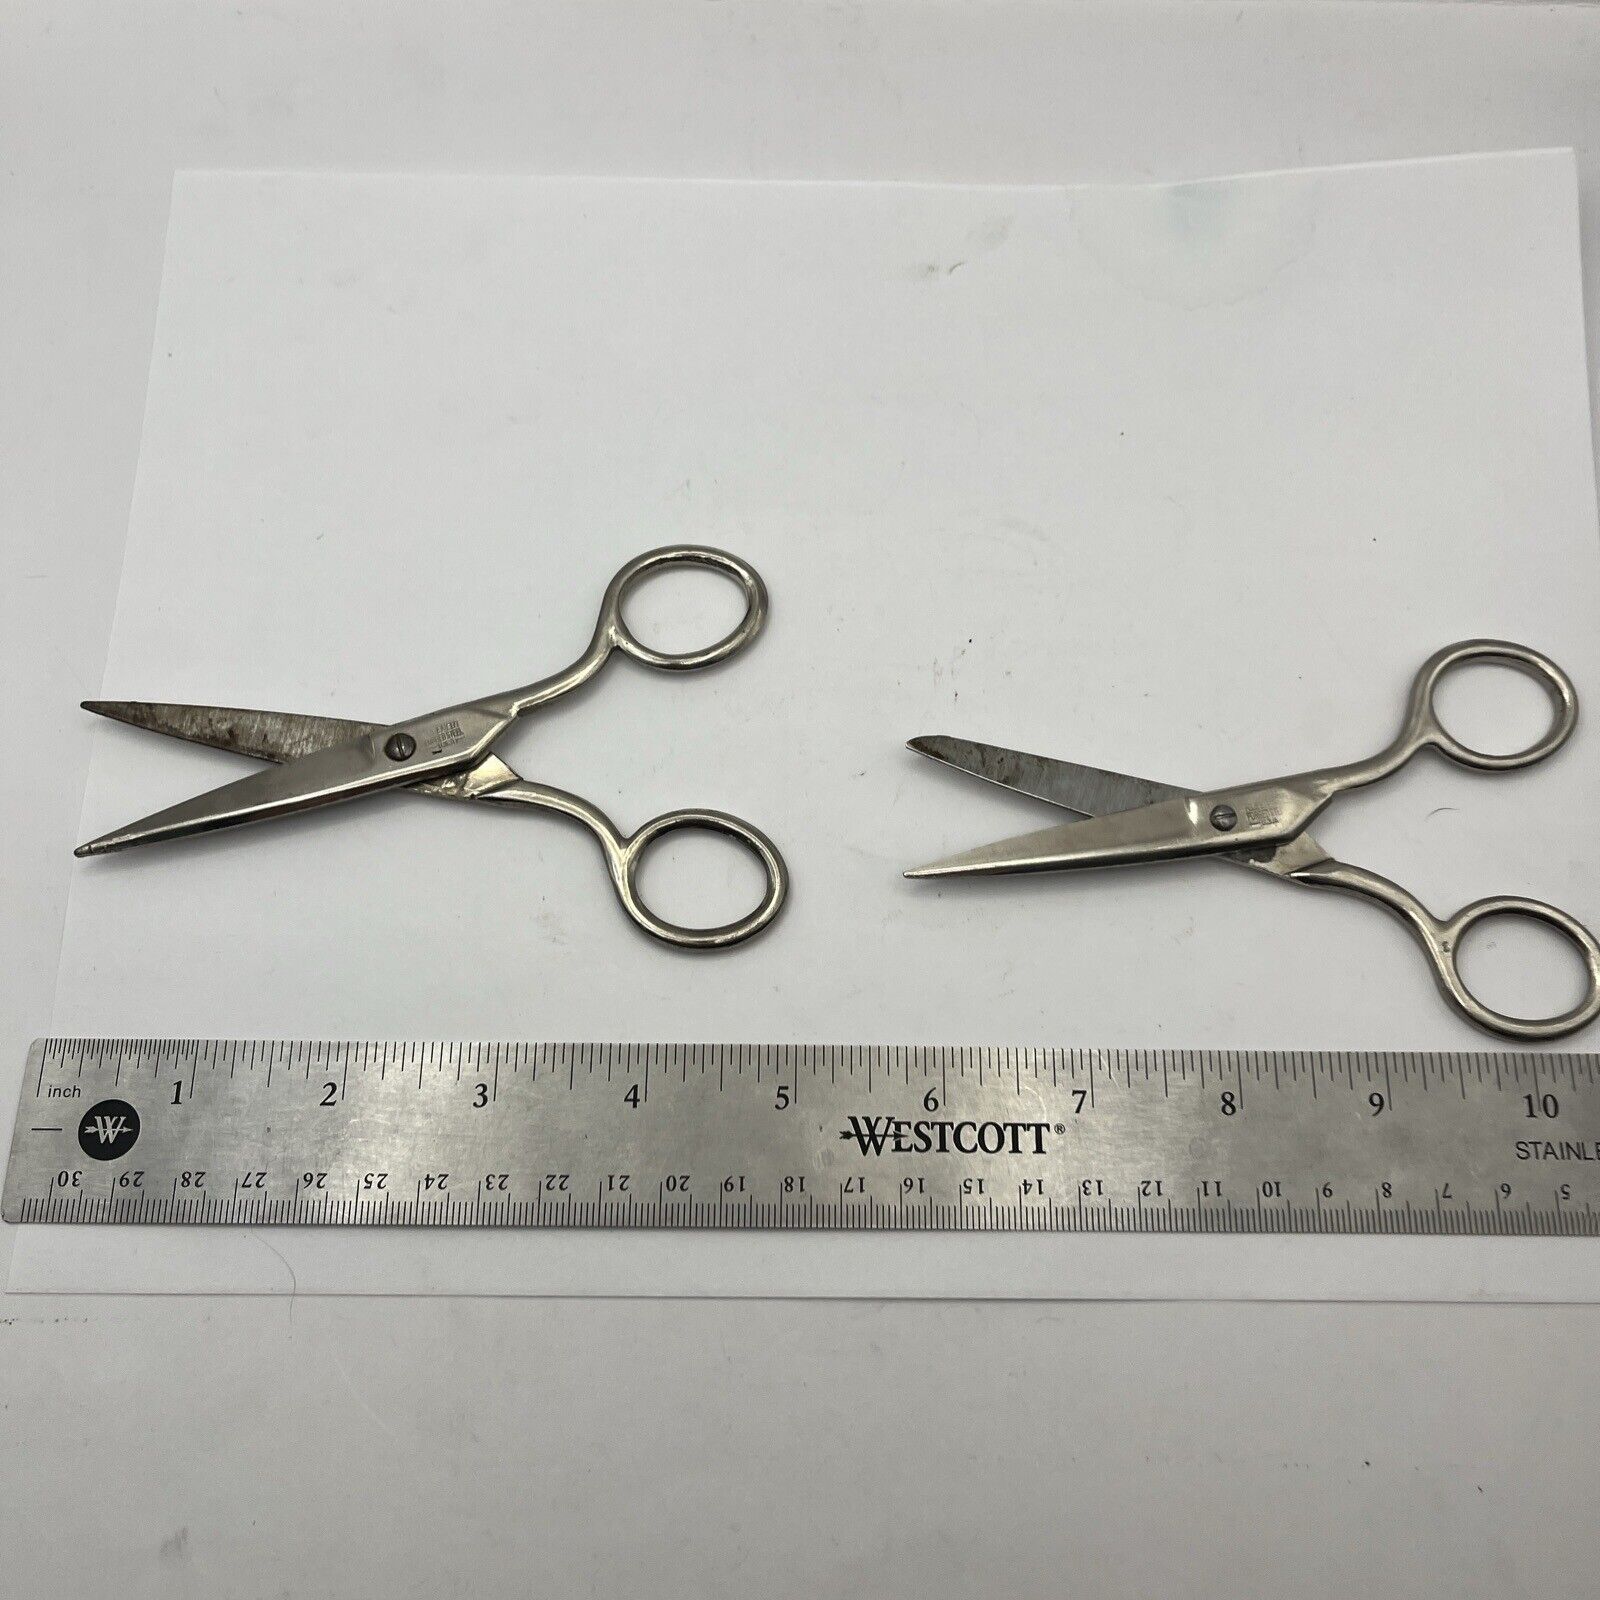 Vintage Deluxe KleenCut  Shears Scissors Silver Handles Made in USA Sewing